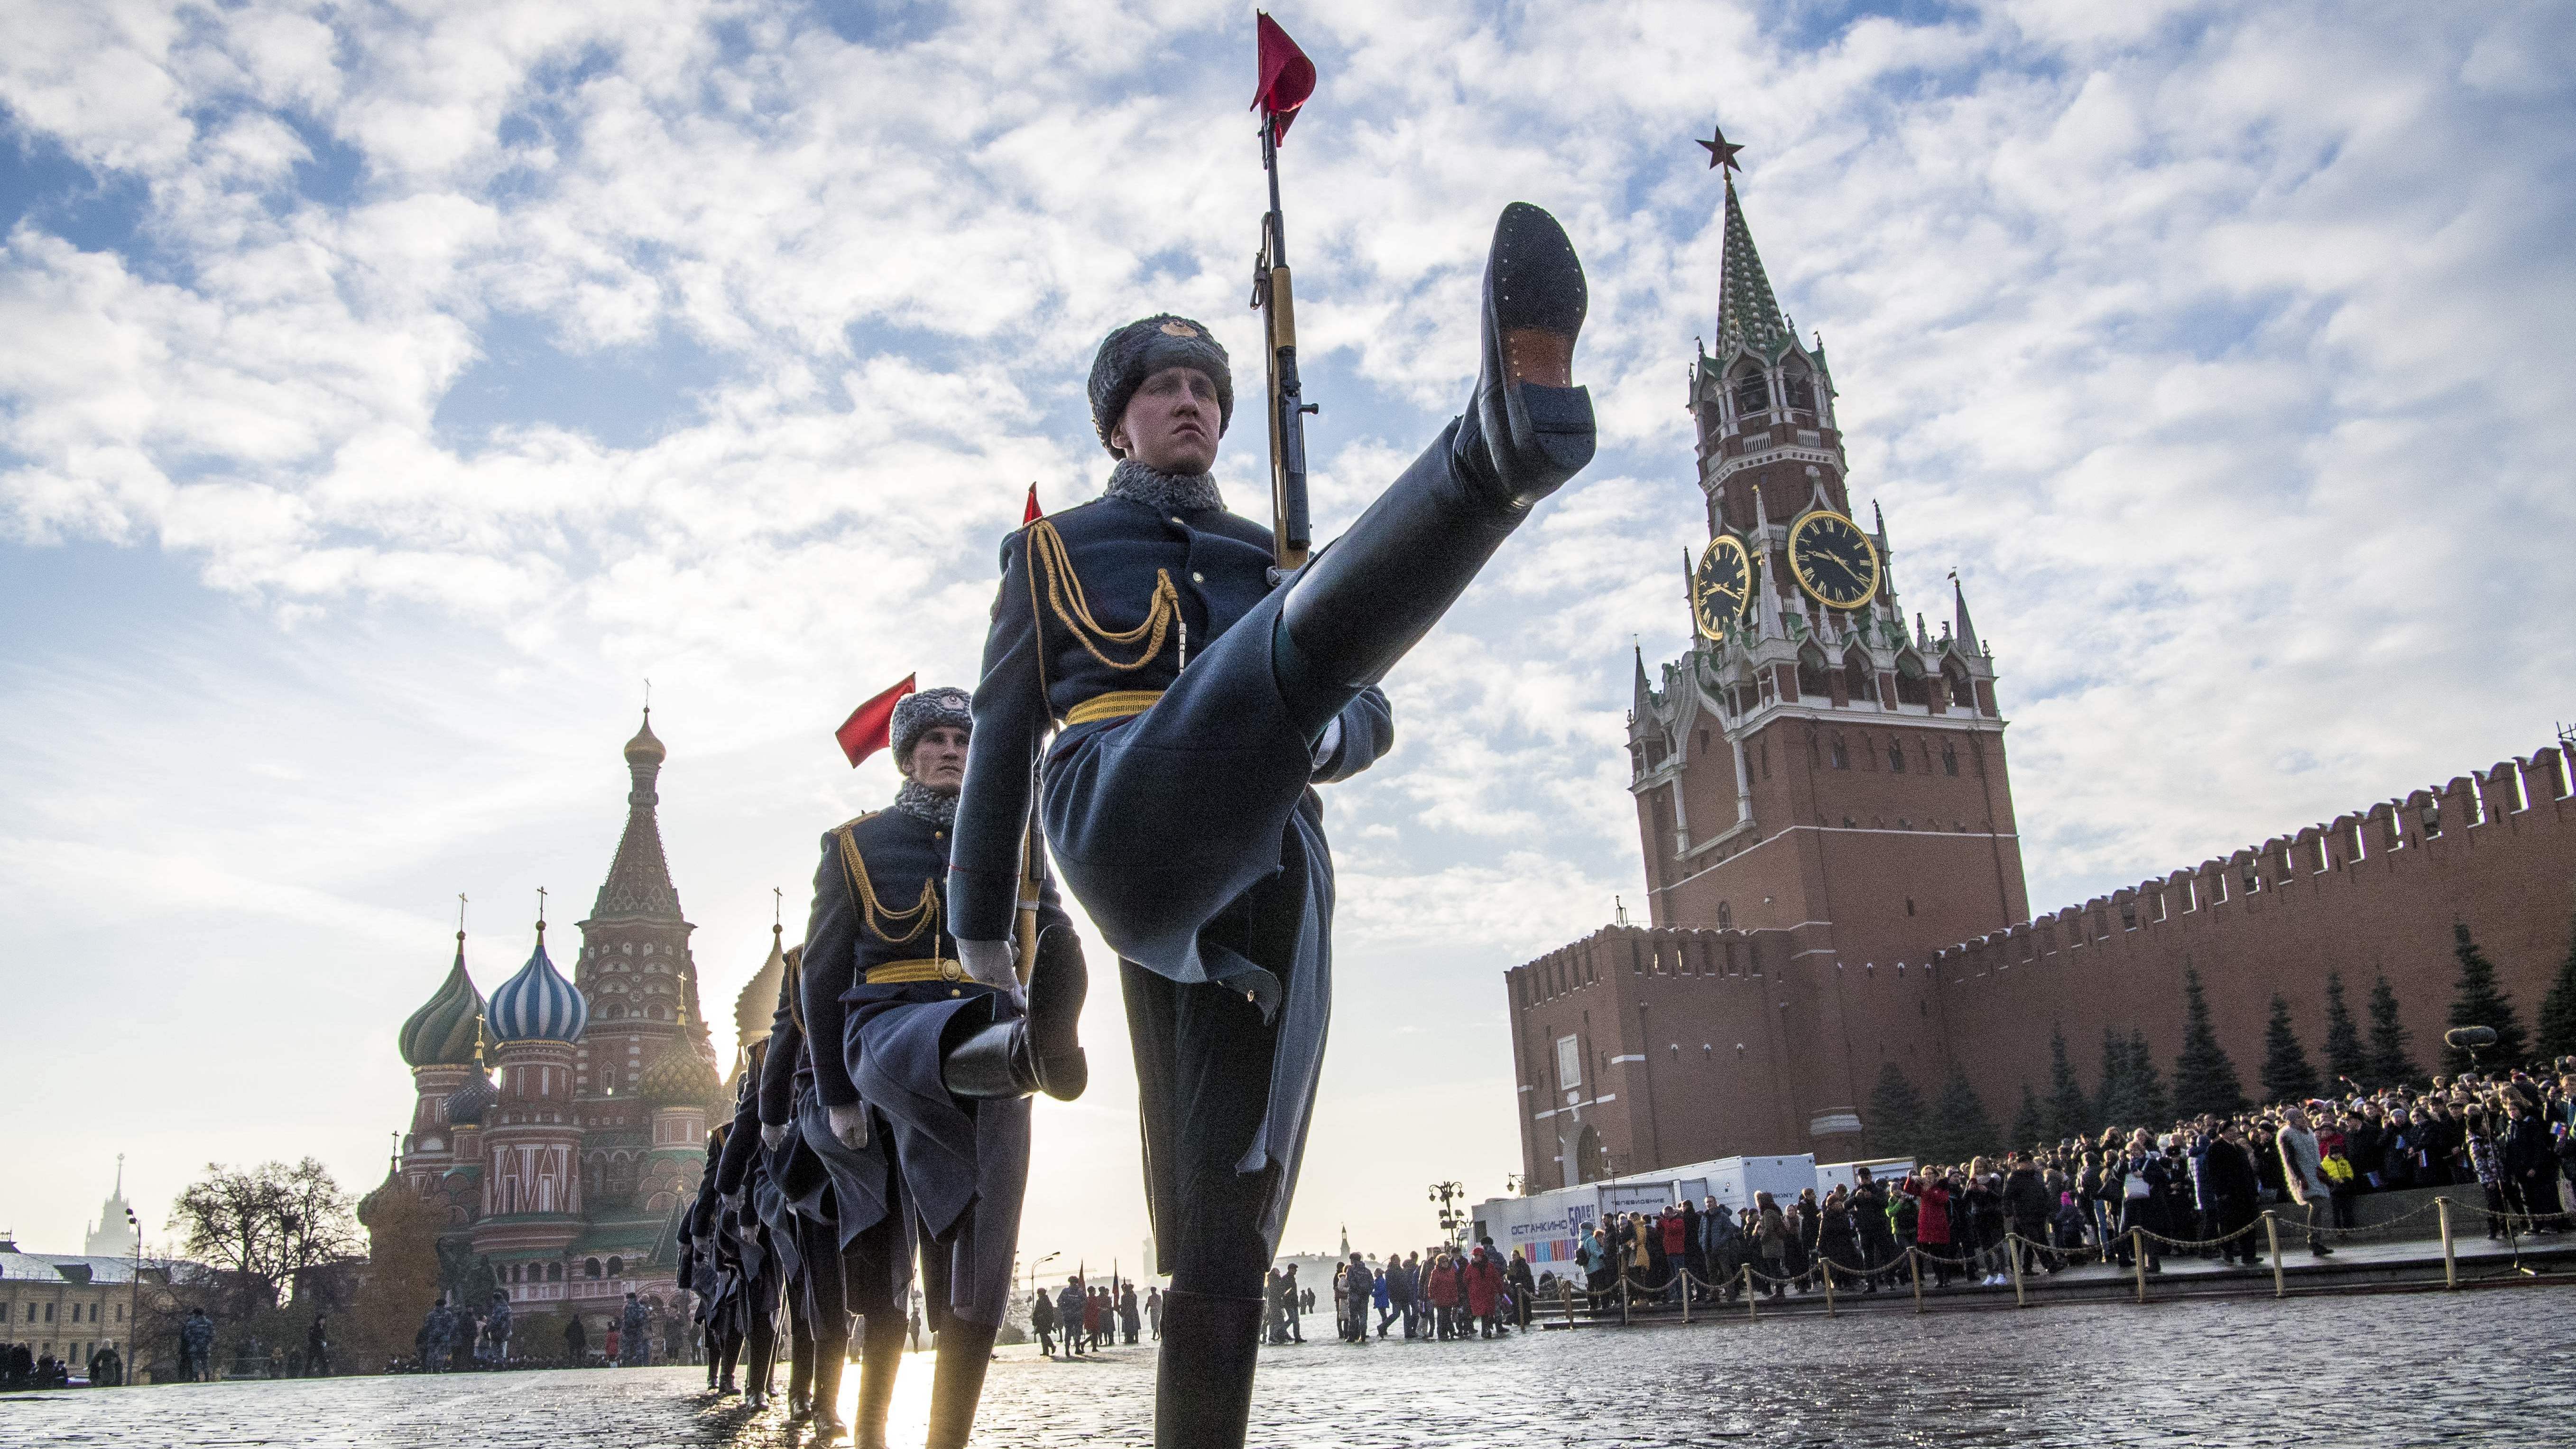 Russian Honor Guards March During The Military Parade At Red Square In